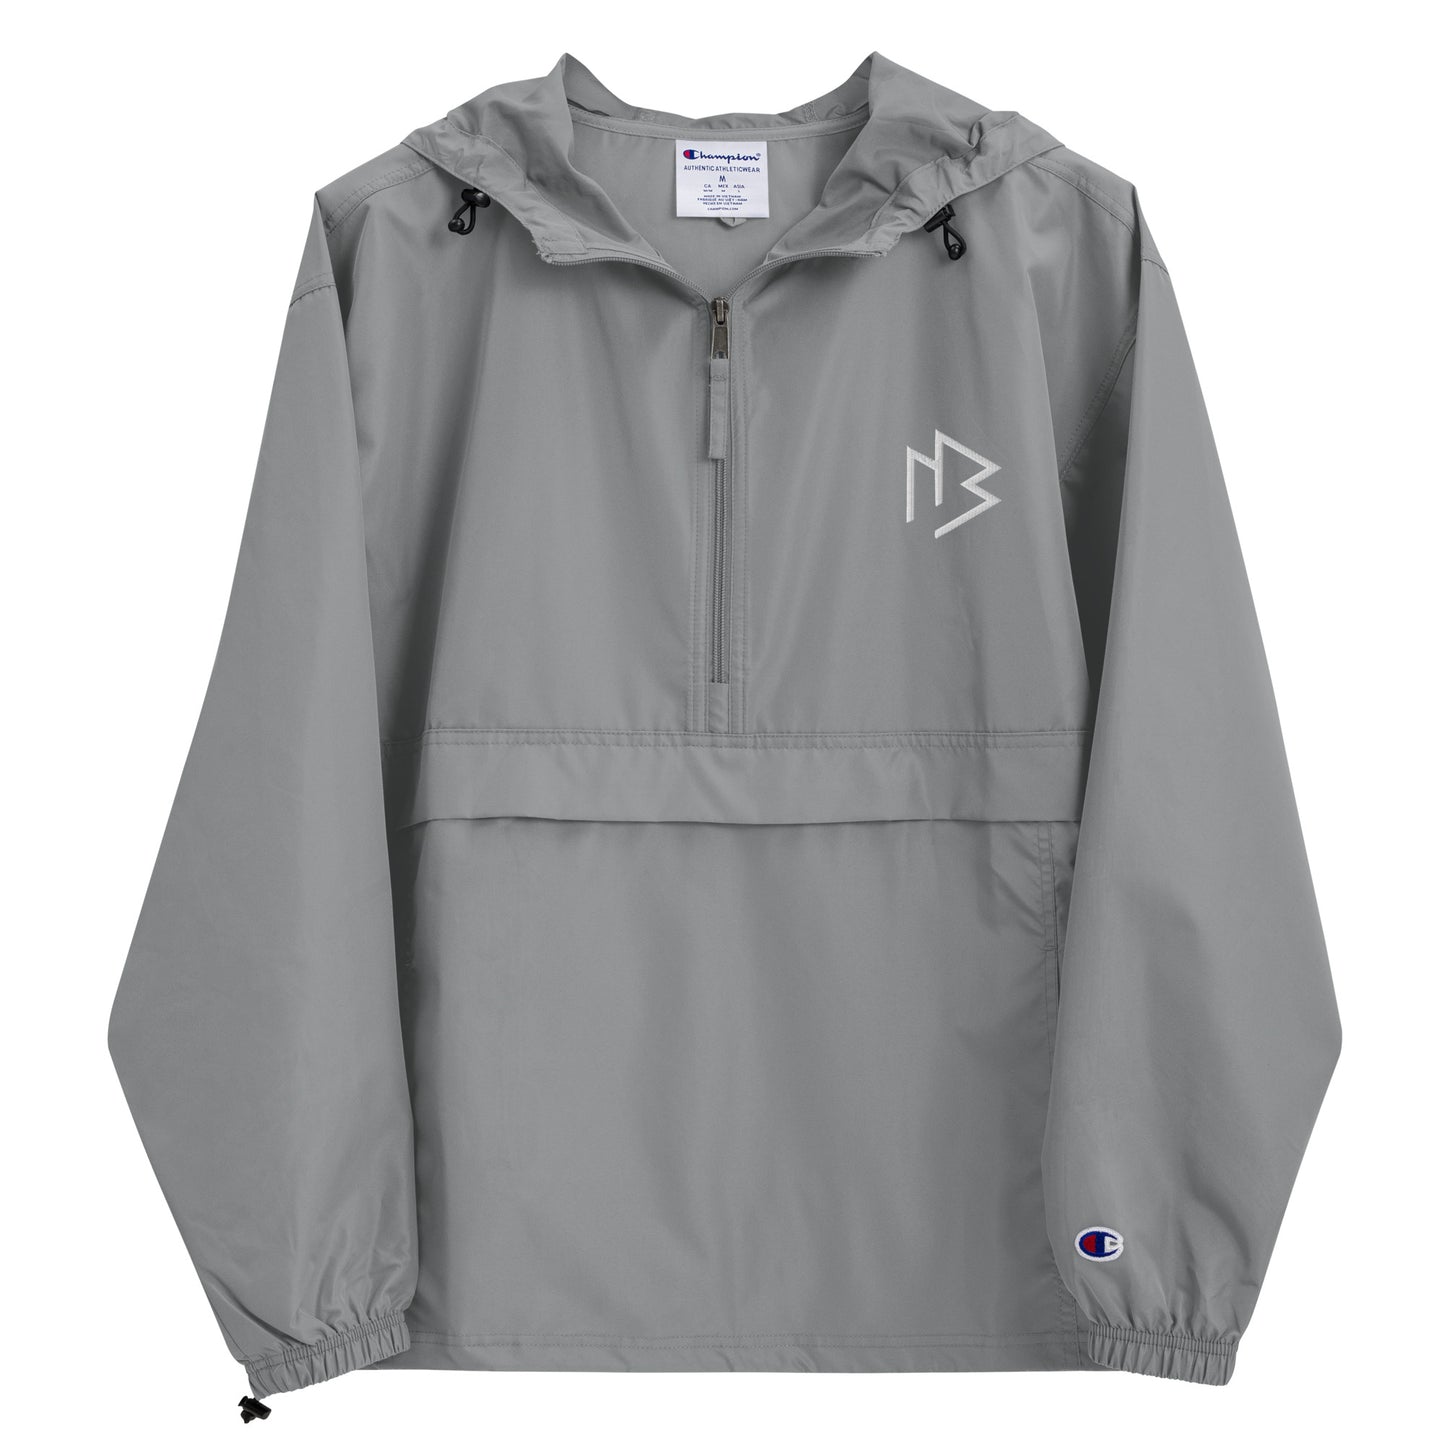 White Logo Packable Jacket